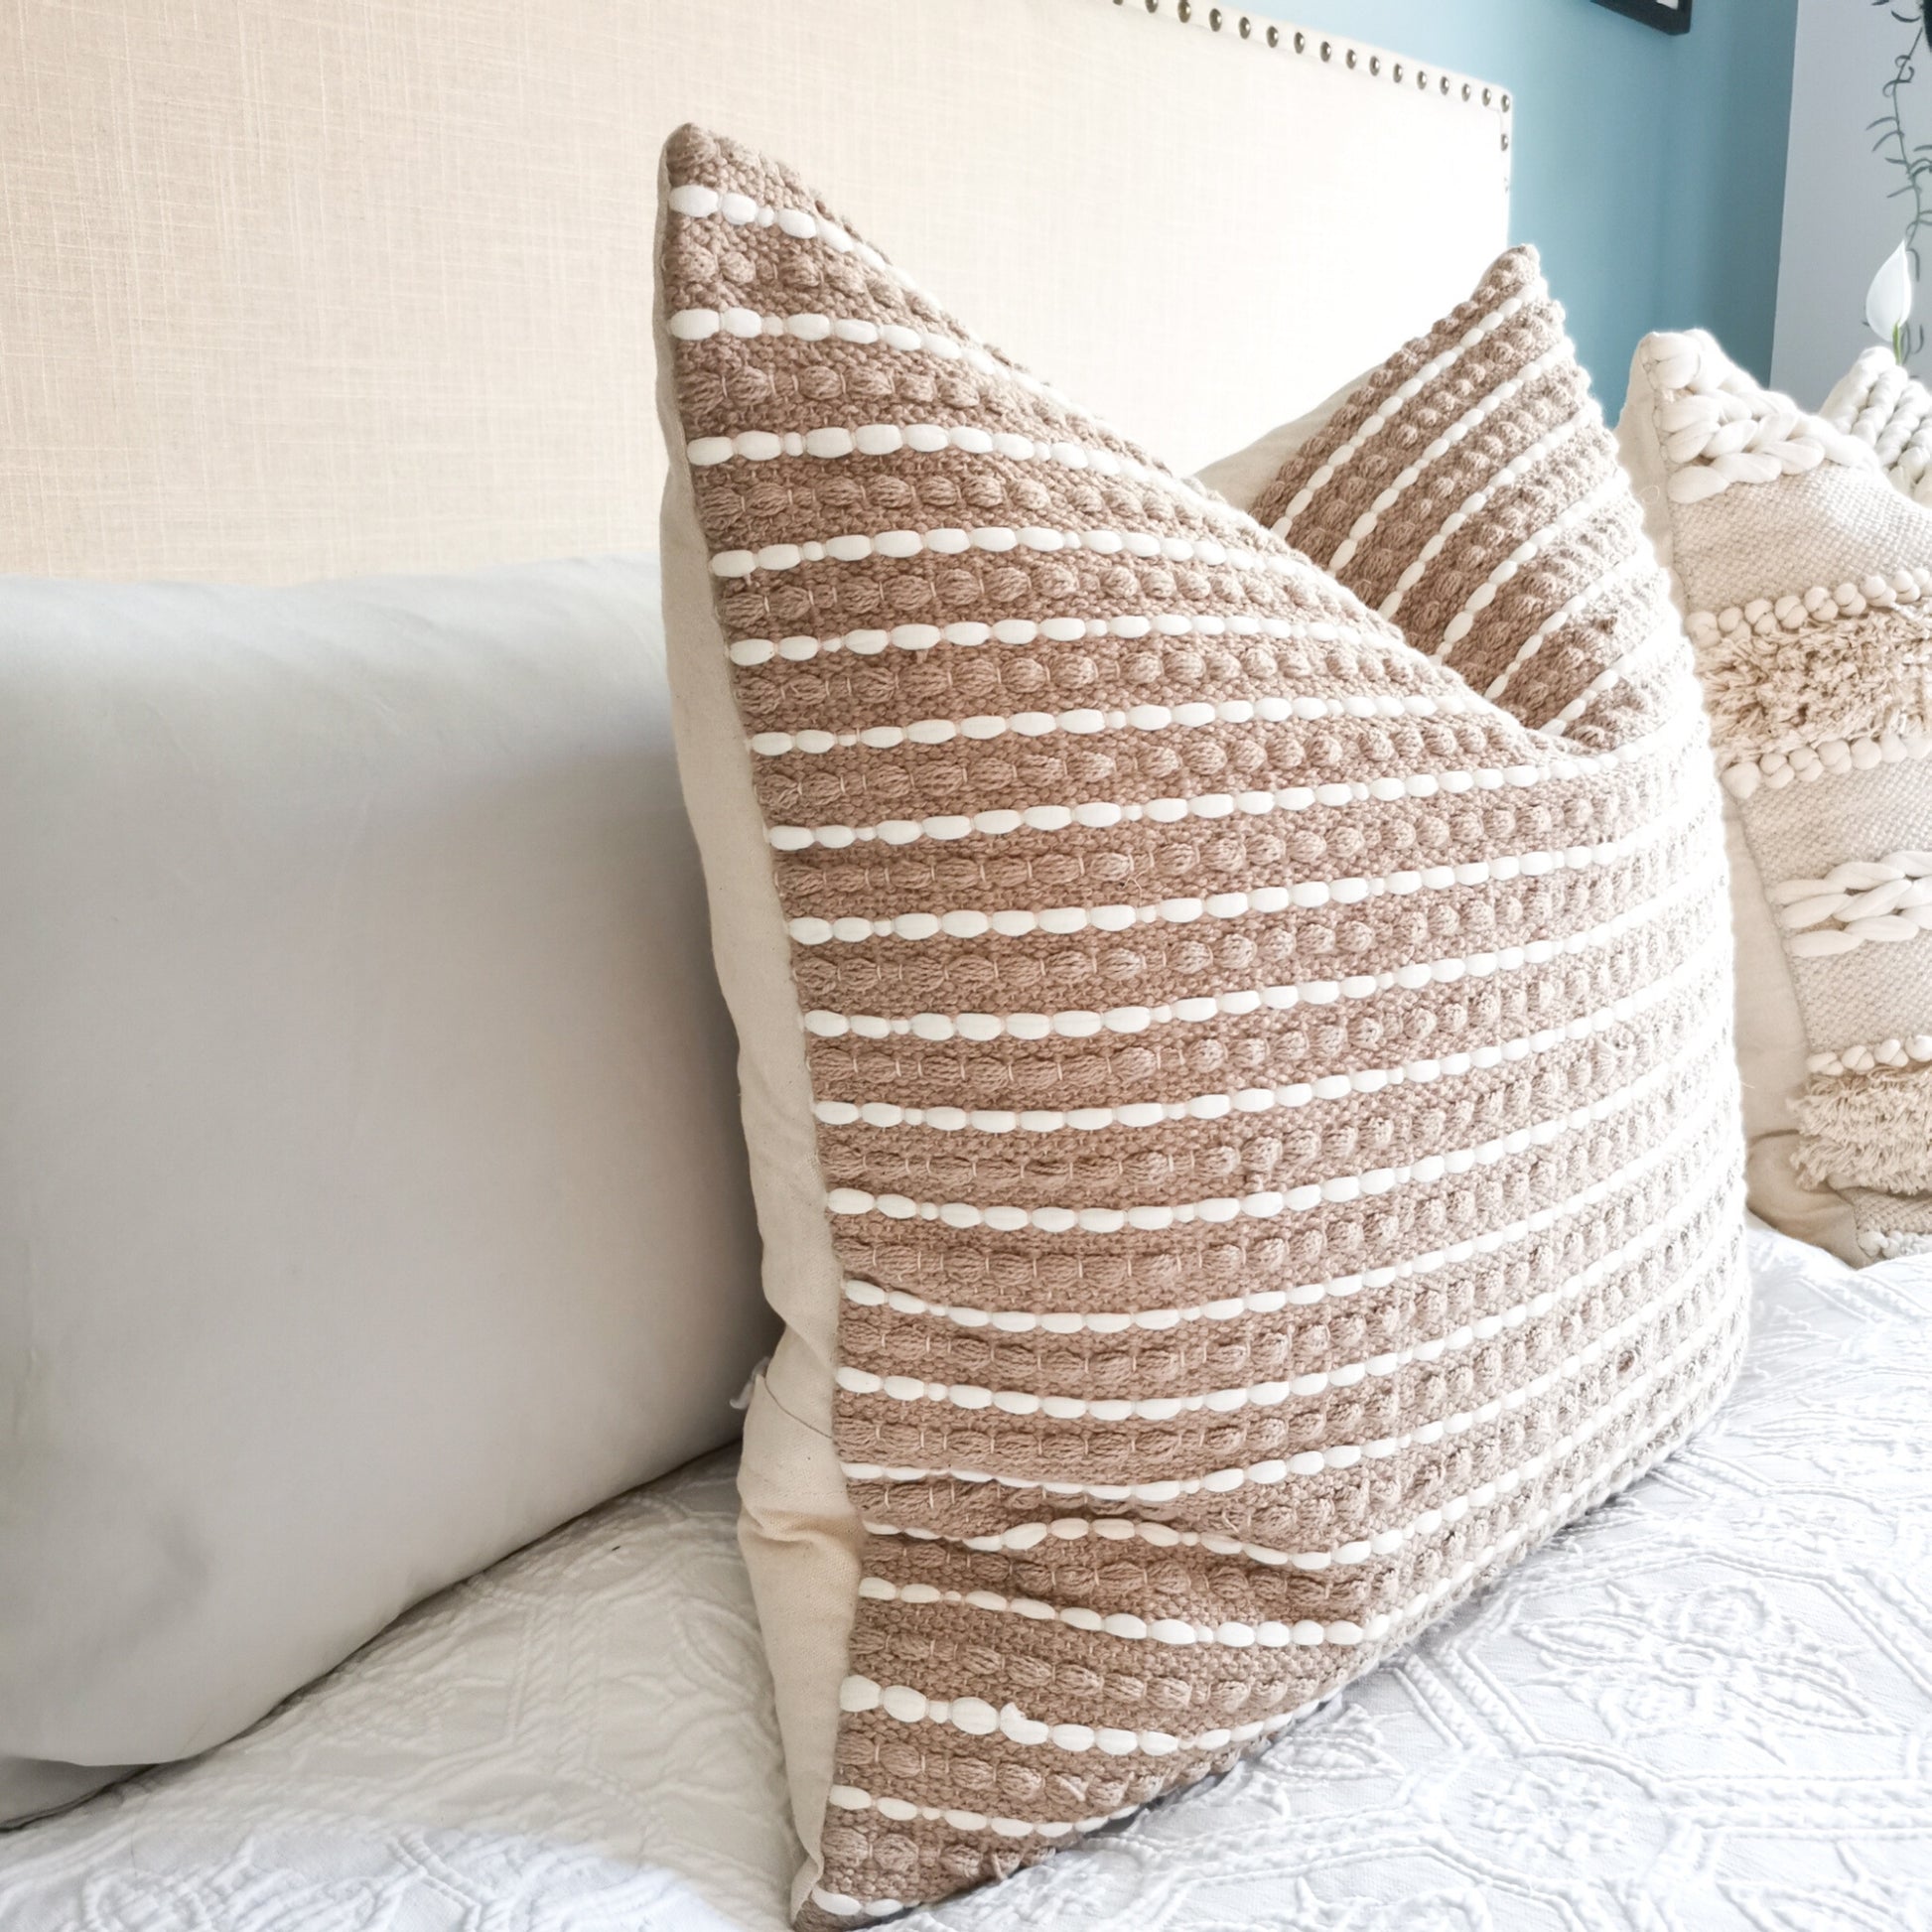 Hand loom woven pillows on a white bed